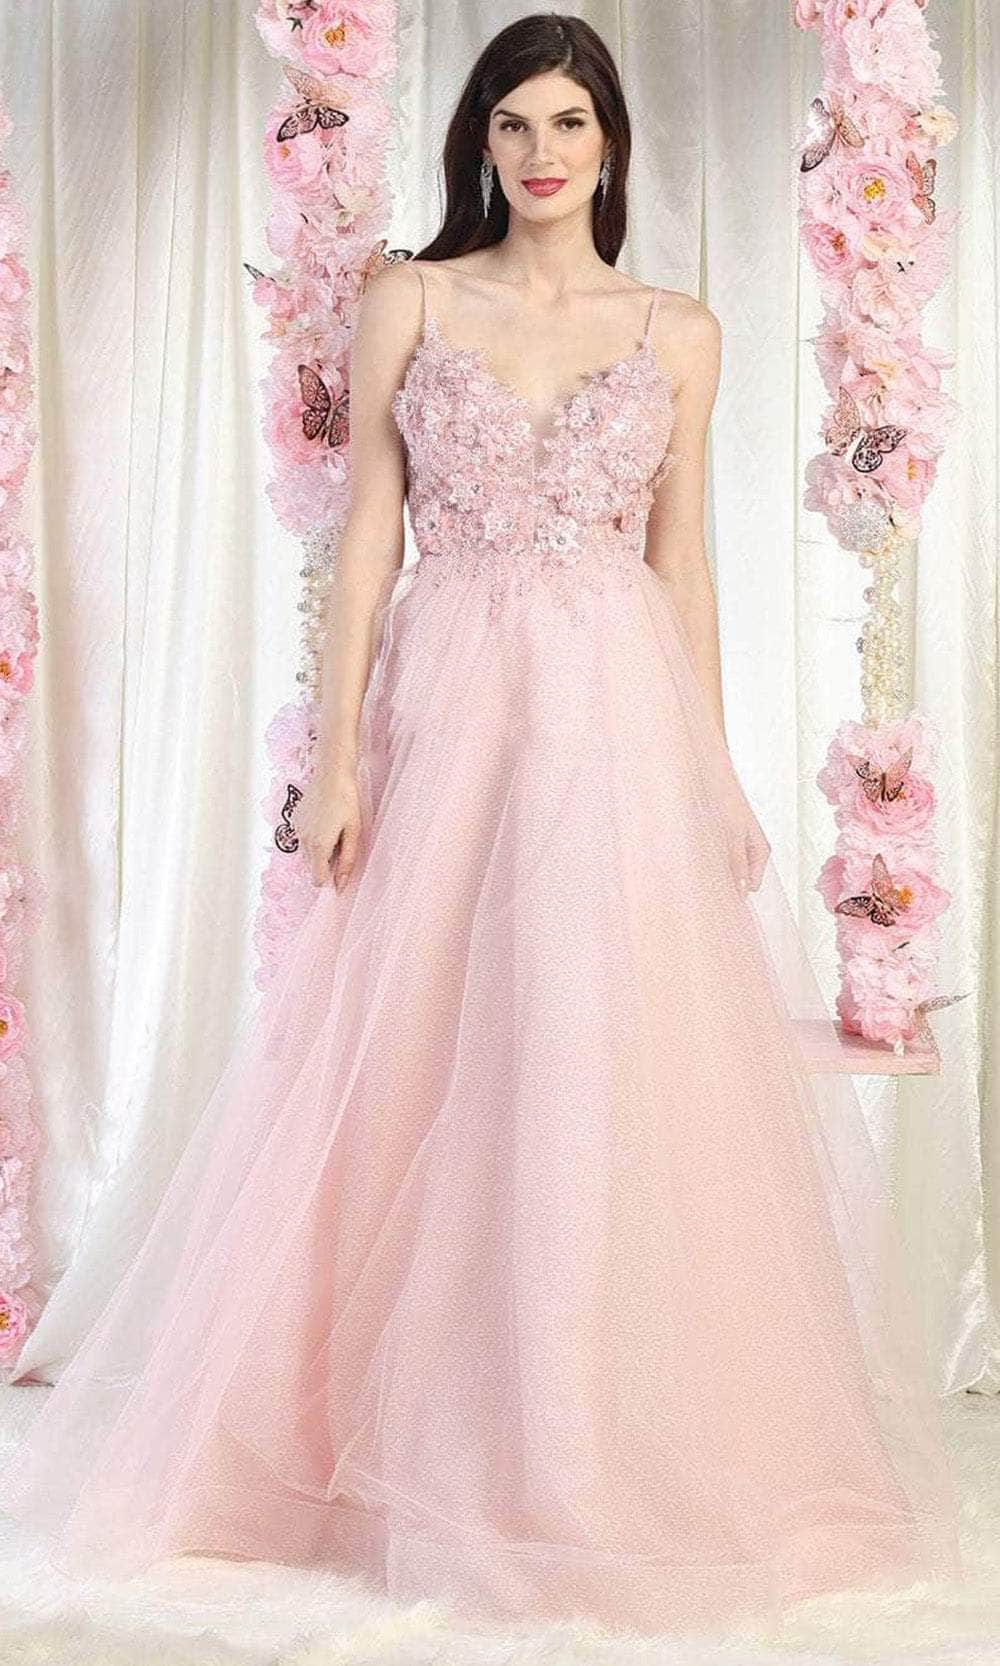 Image of May Queen RQ8024 - Spaghetti Strap A-Line Prom Gown